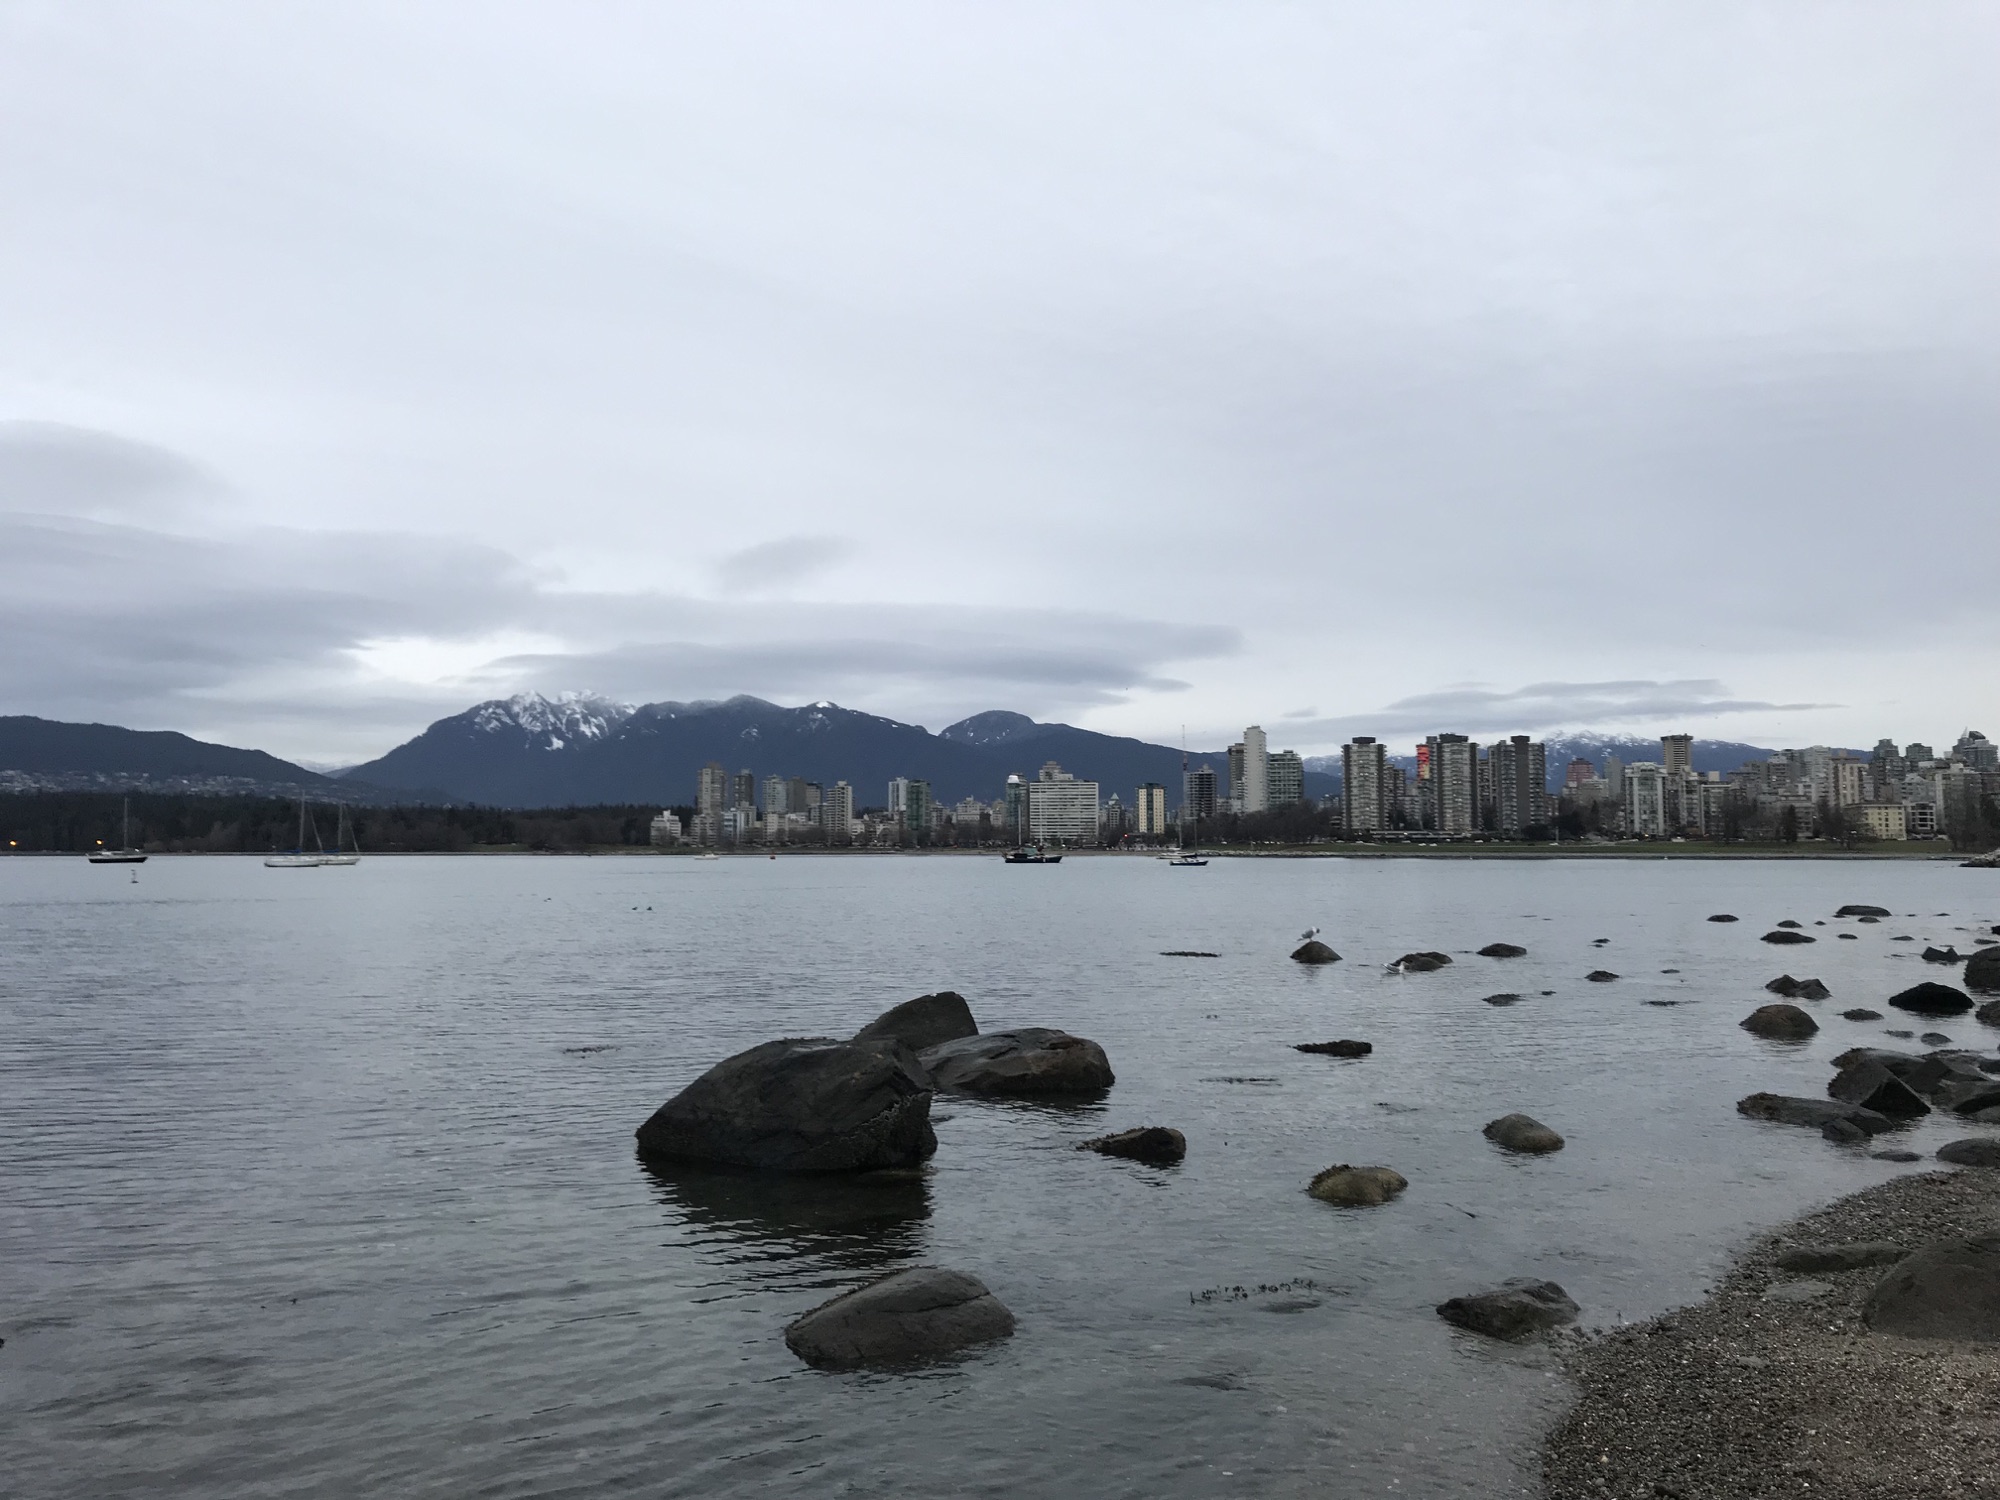 Downtown Vancouver with the mountains in the background